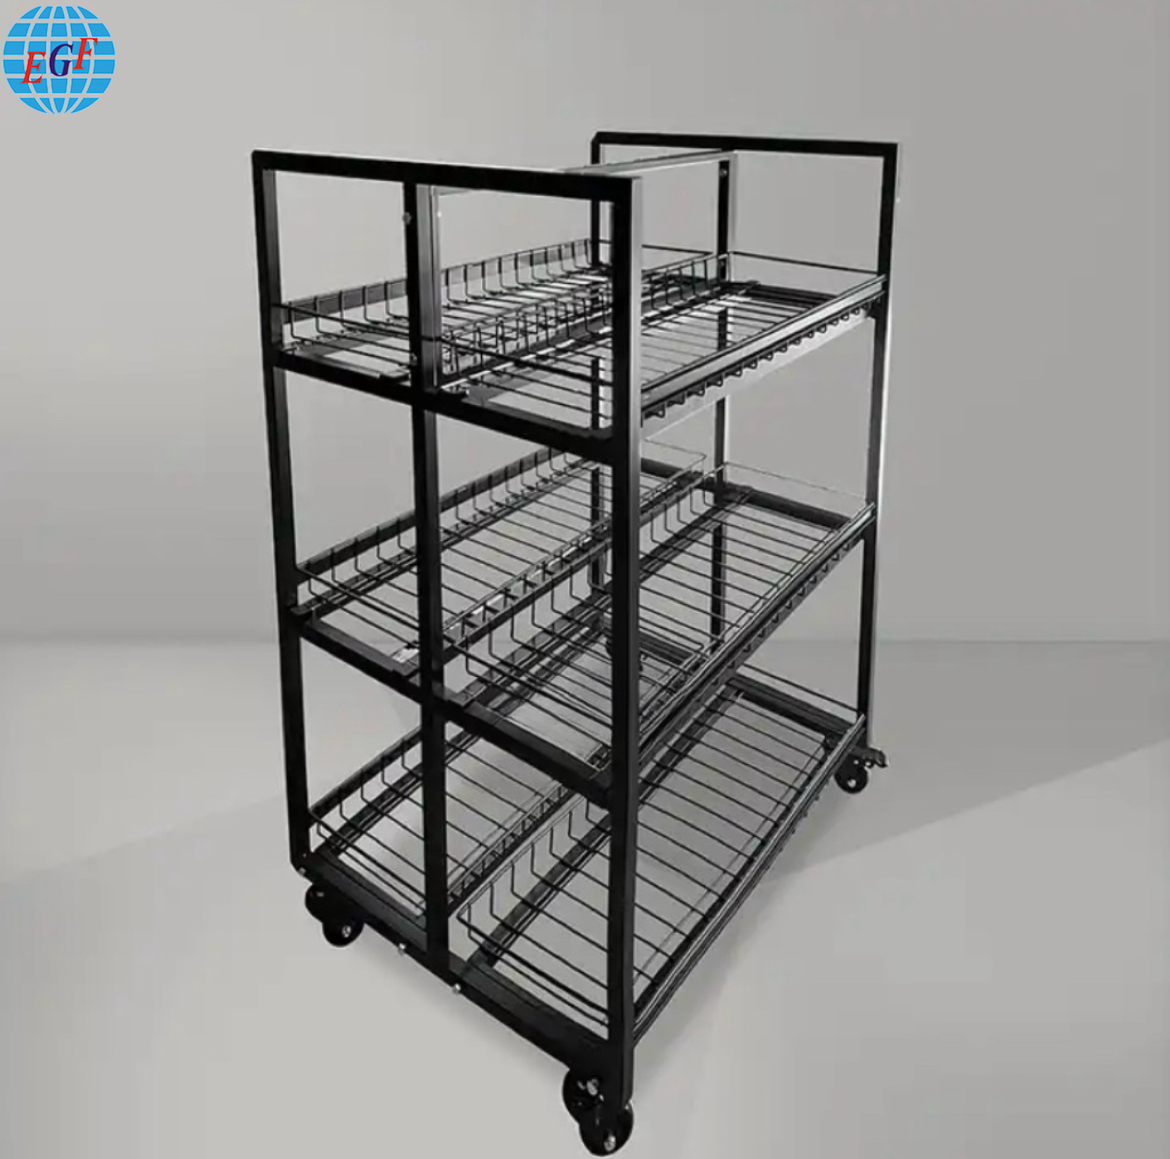 Customized Three-Tier Metal Stand with Wheels and Six Wire Baskets for Retail Stores